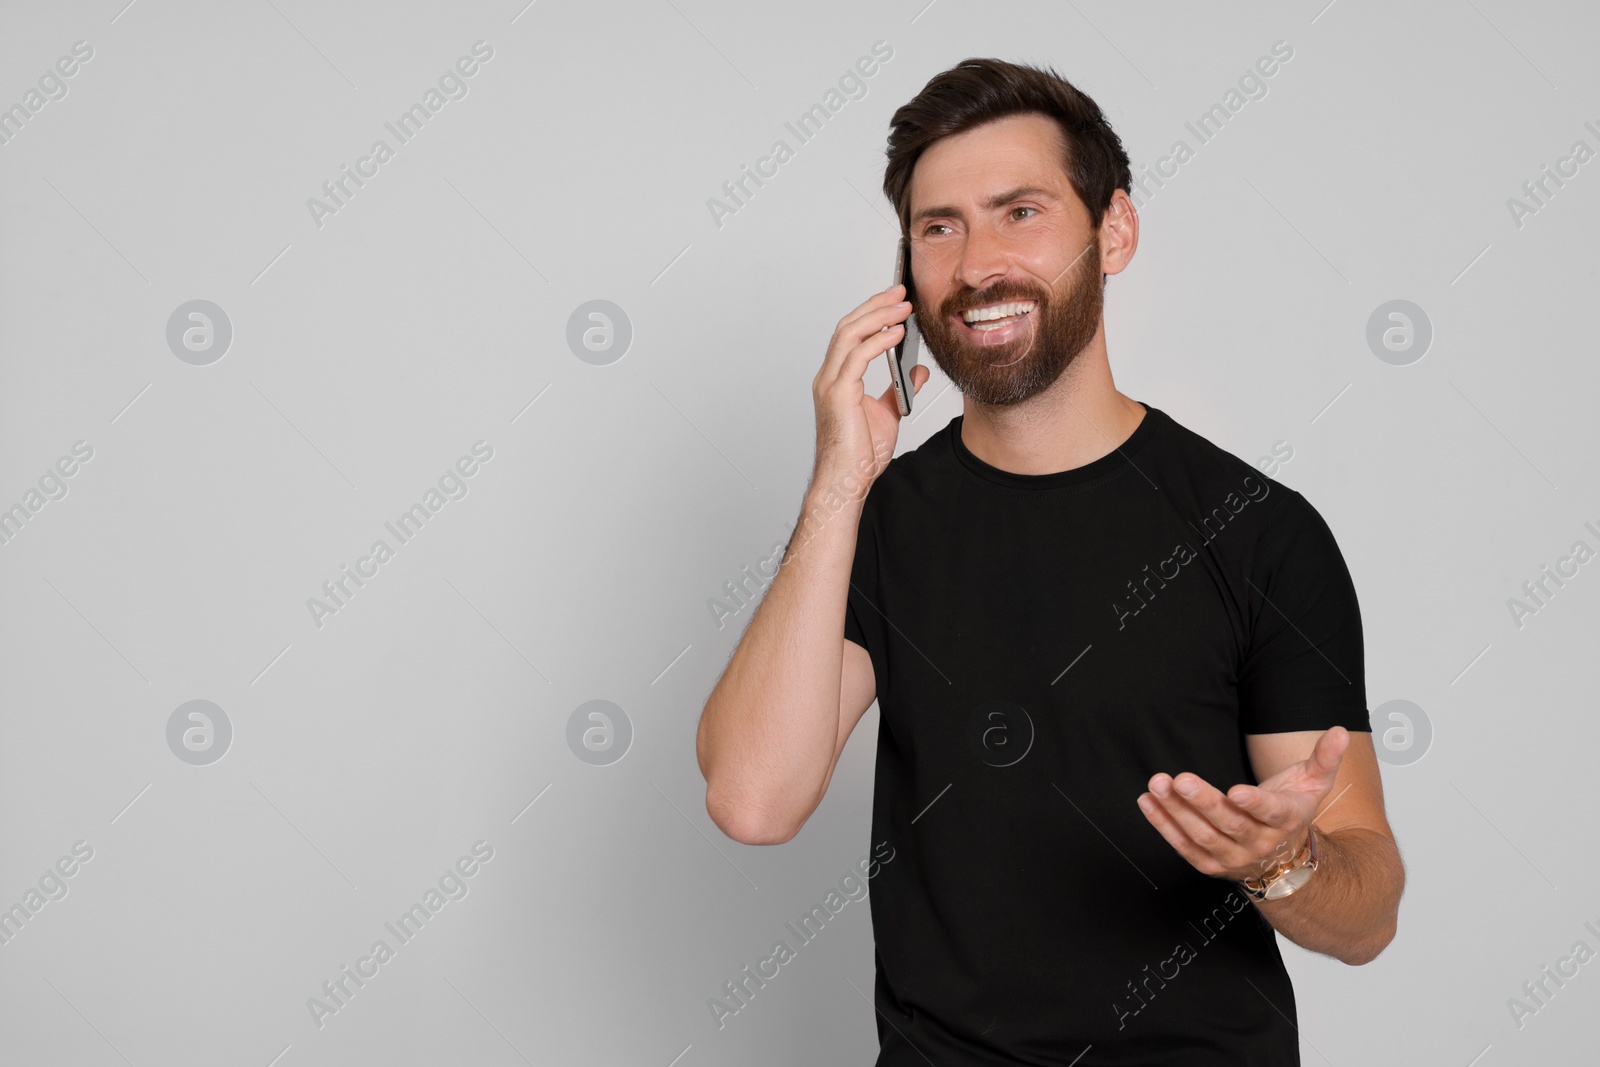 Photo of Happy man talking on phone against light background. Space for text